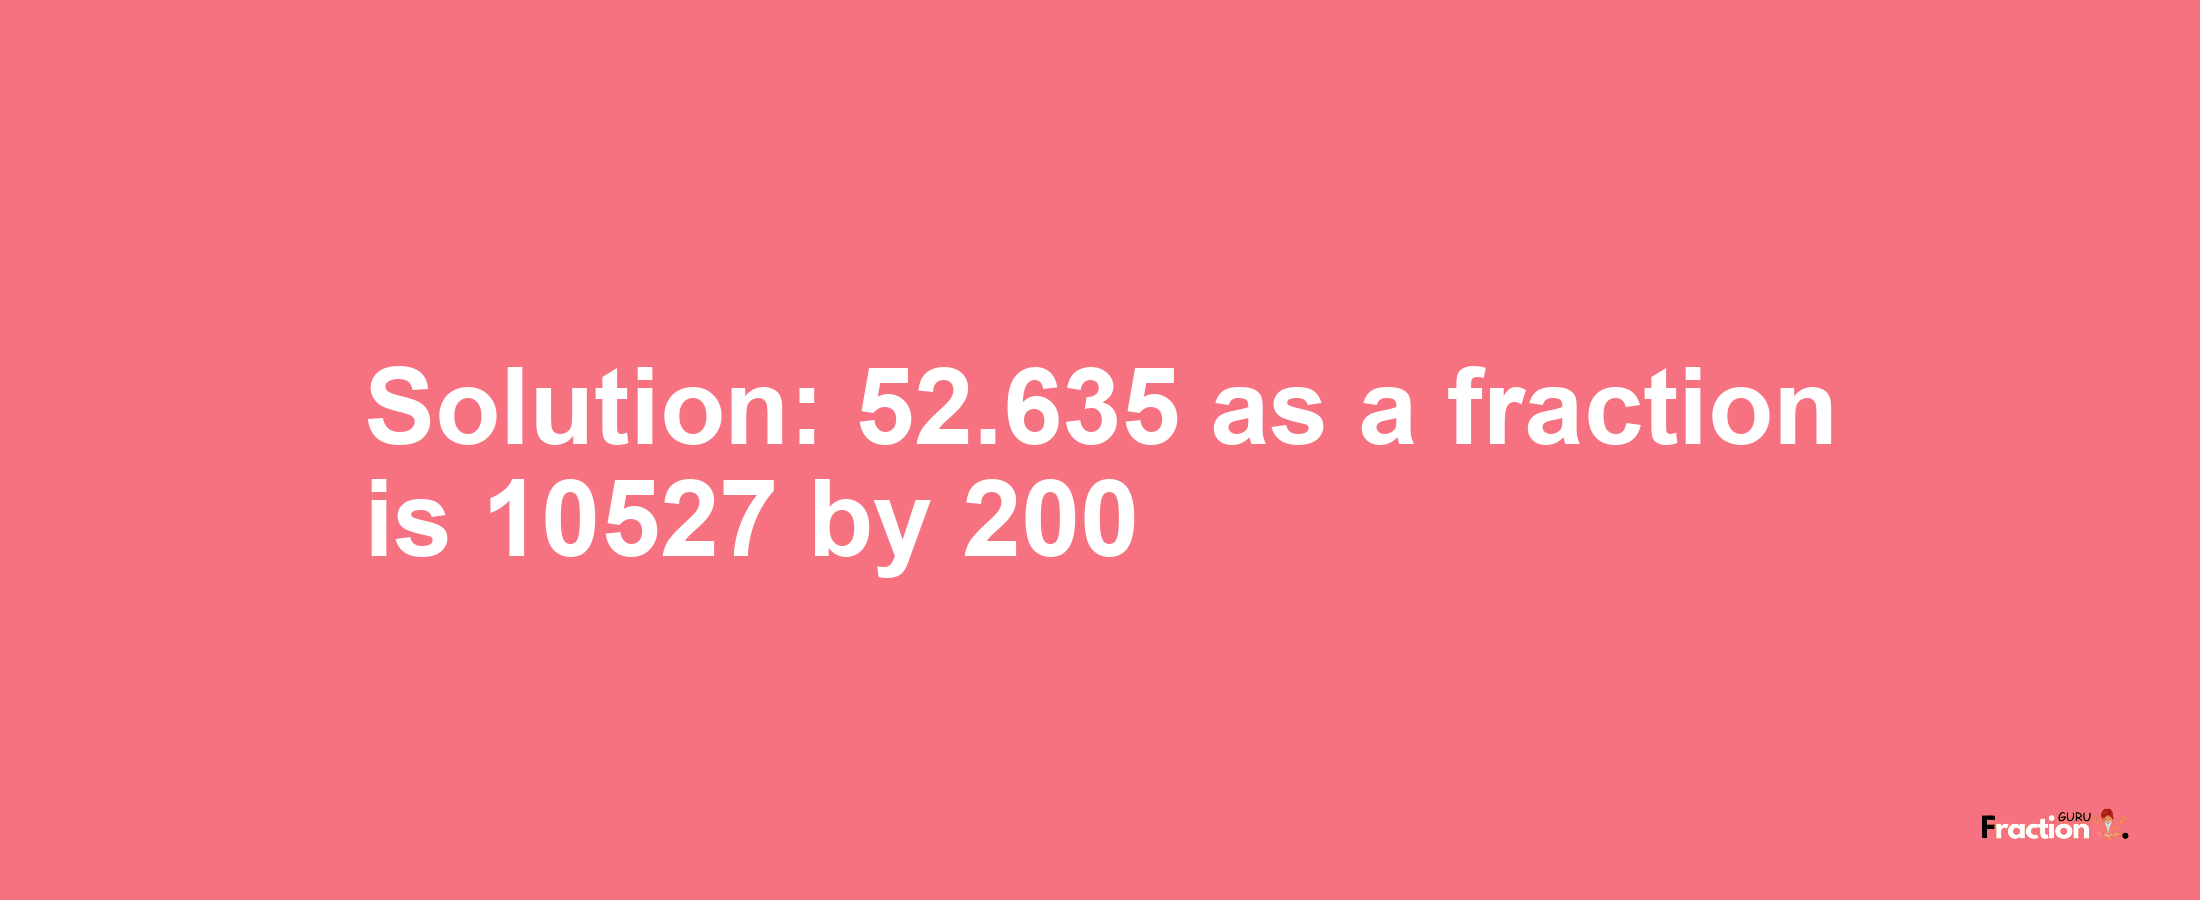 Solution:52.635 as a fraction is 10527/200